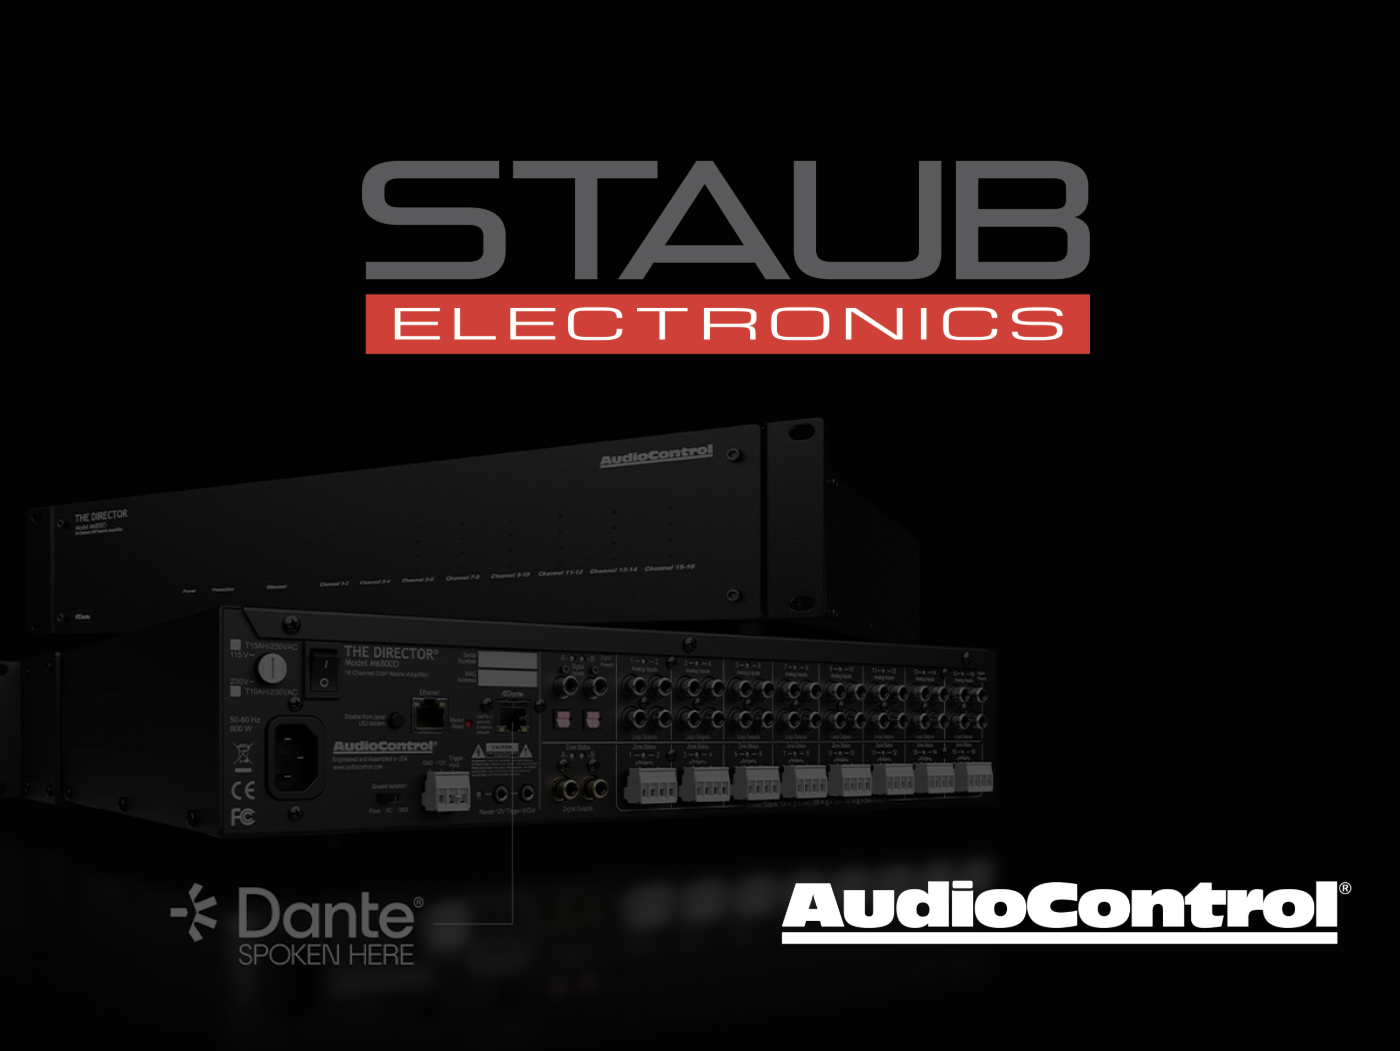 AudioControl Appoints Staub Electronics as their Home Audio Distributor for Canada